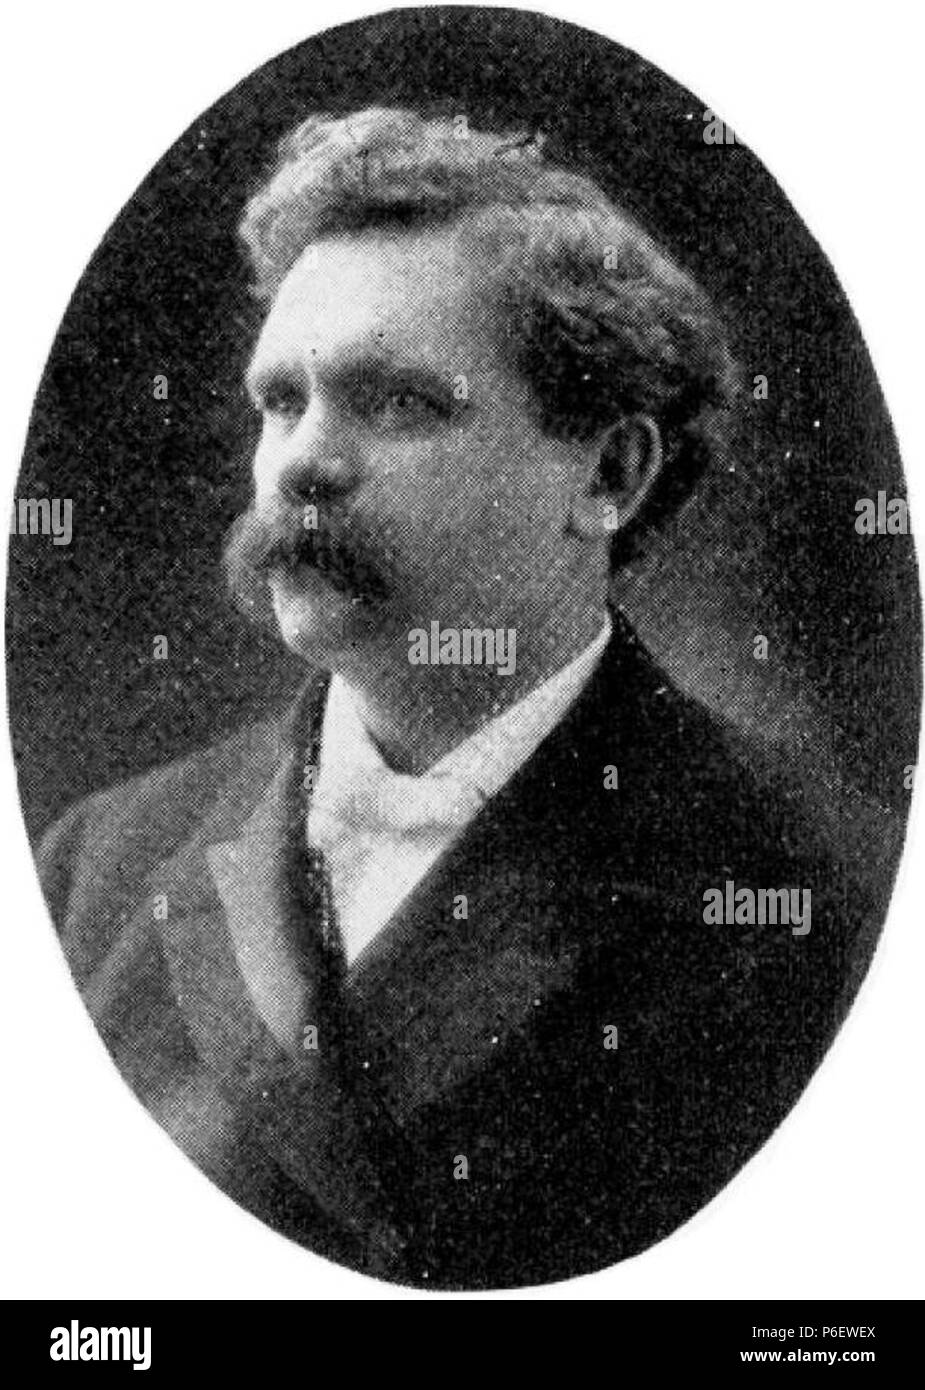 English: A Photo of Brigham Henry Roberts, a LDS leader, historian, and politician who published a six-volume history of The Church of Jesus Christ of Latter-day Saints (LDS Church) and was denied a seat as a member of United States Congress because of his practice of plural marriage. 1901 8 Brigham Henry Roberts Stock Photo